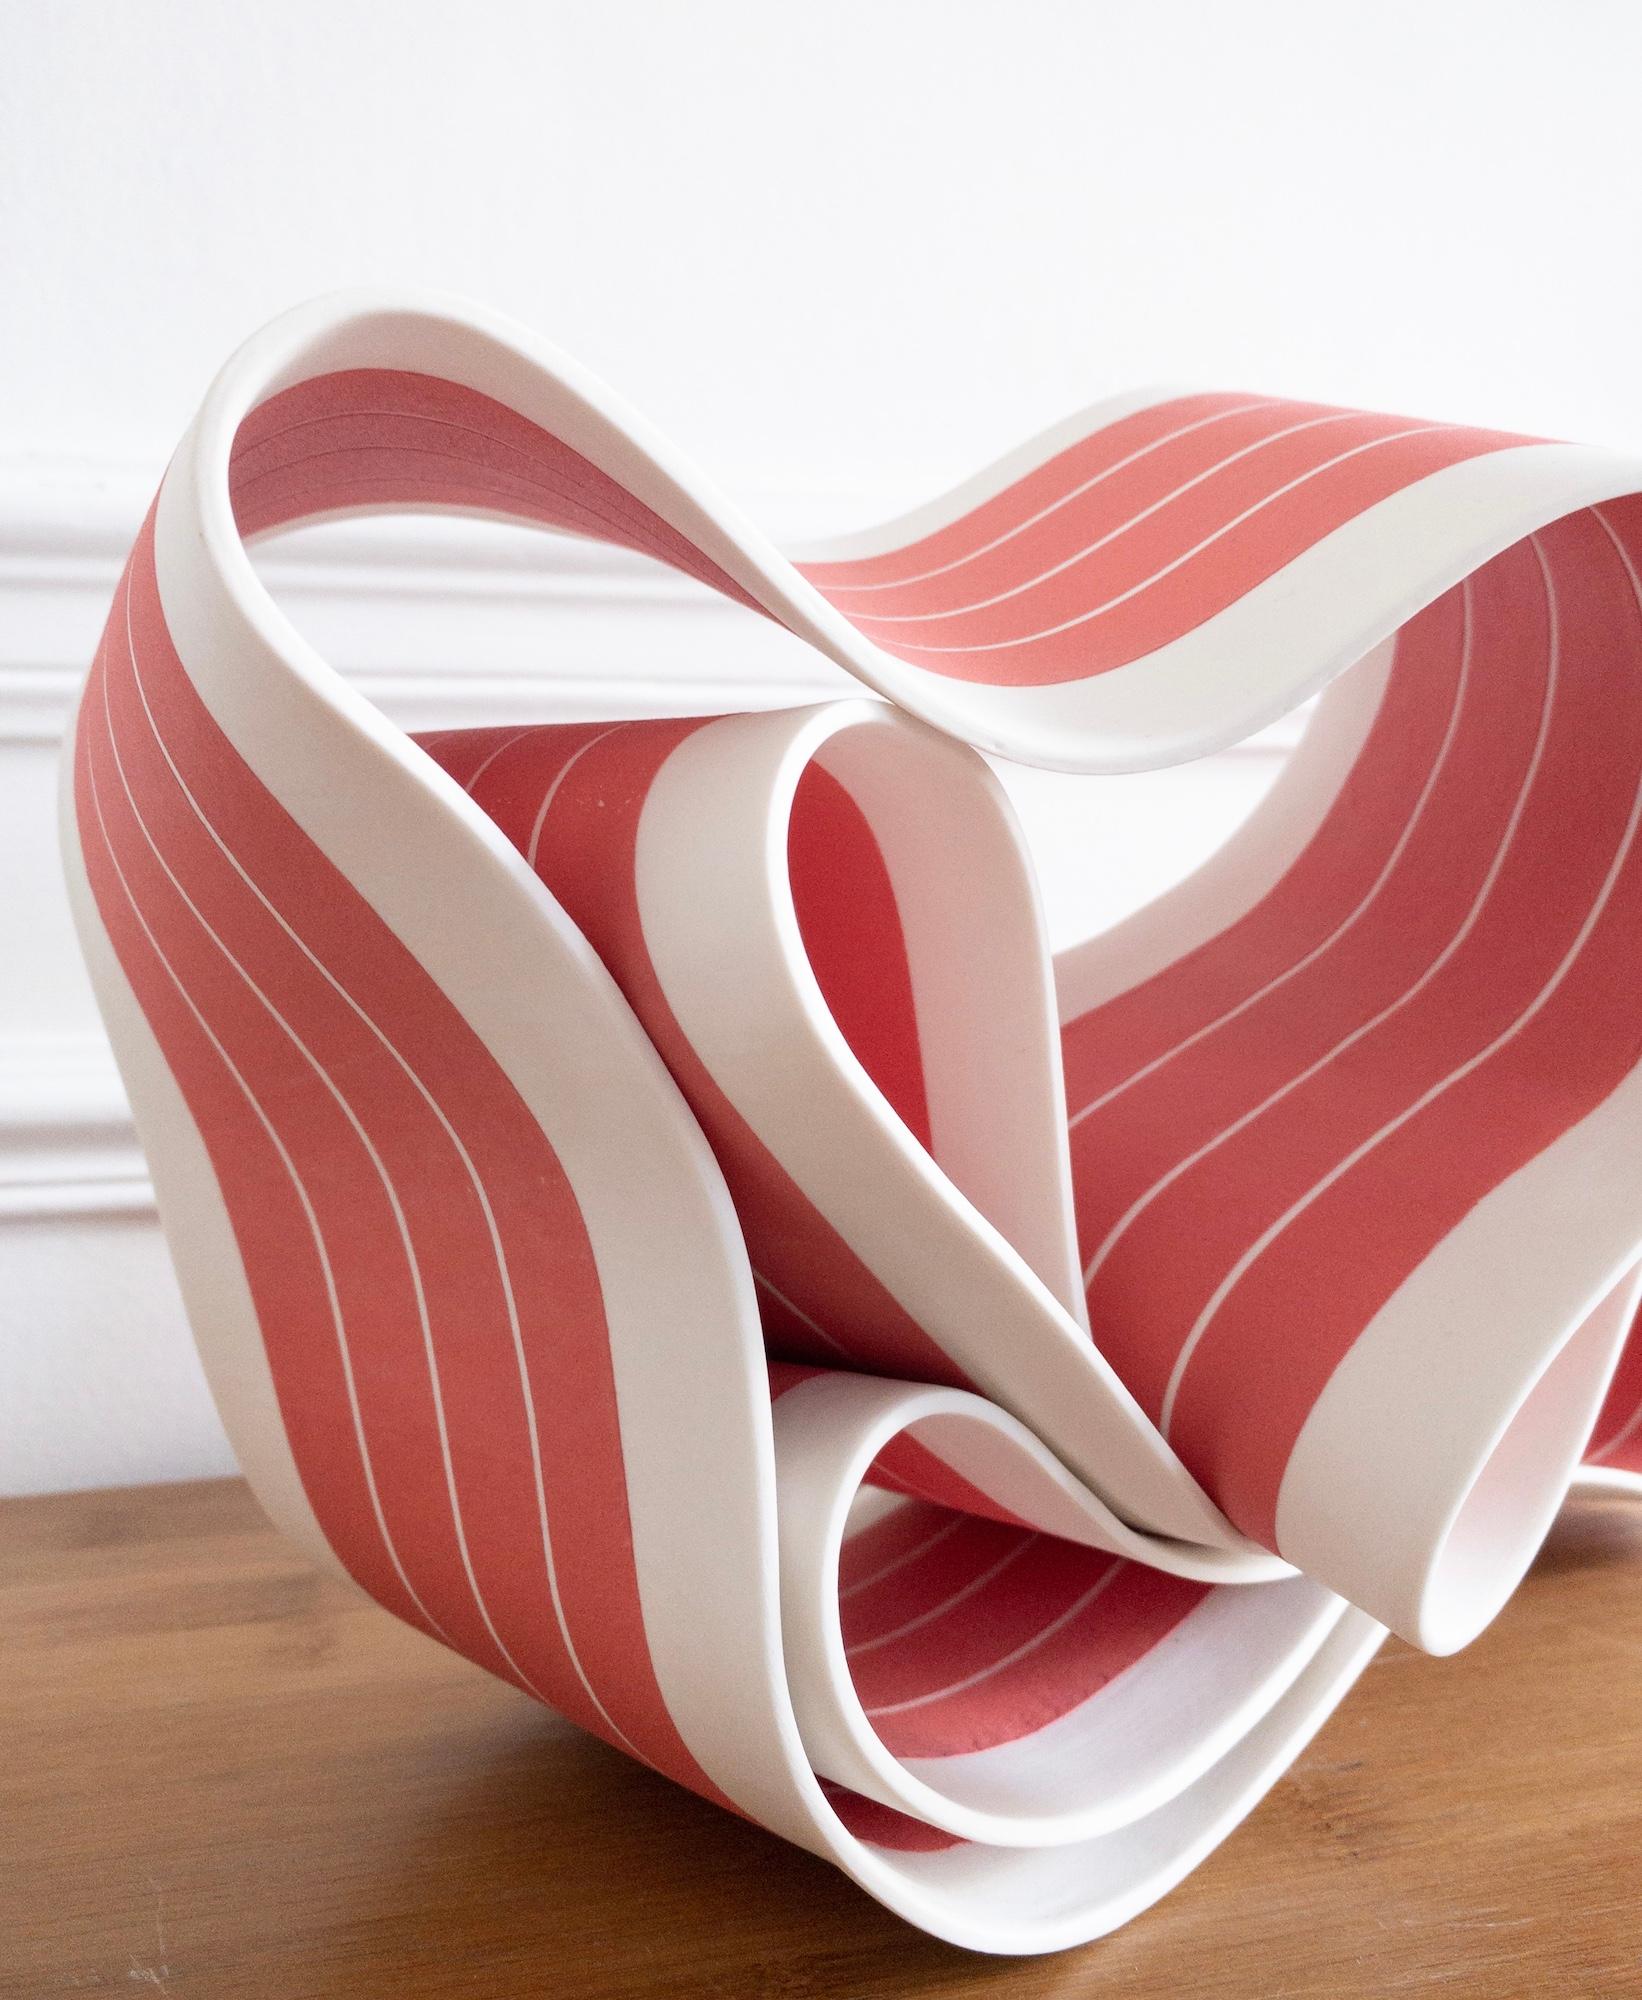 Folding in Motion 3 by Simcha Even-Chen - porcelain sculpture, red For Sale 9